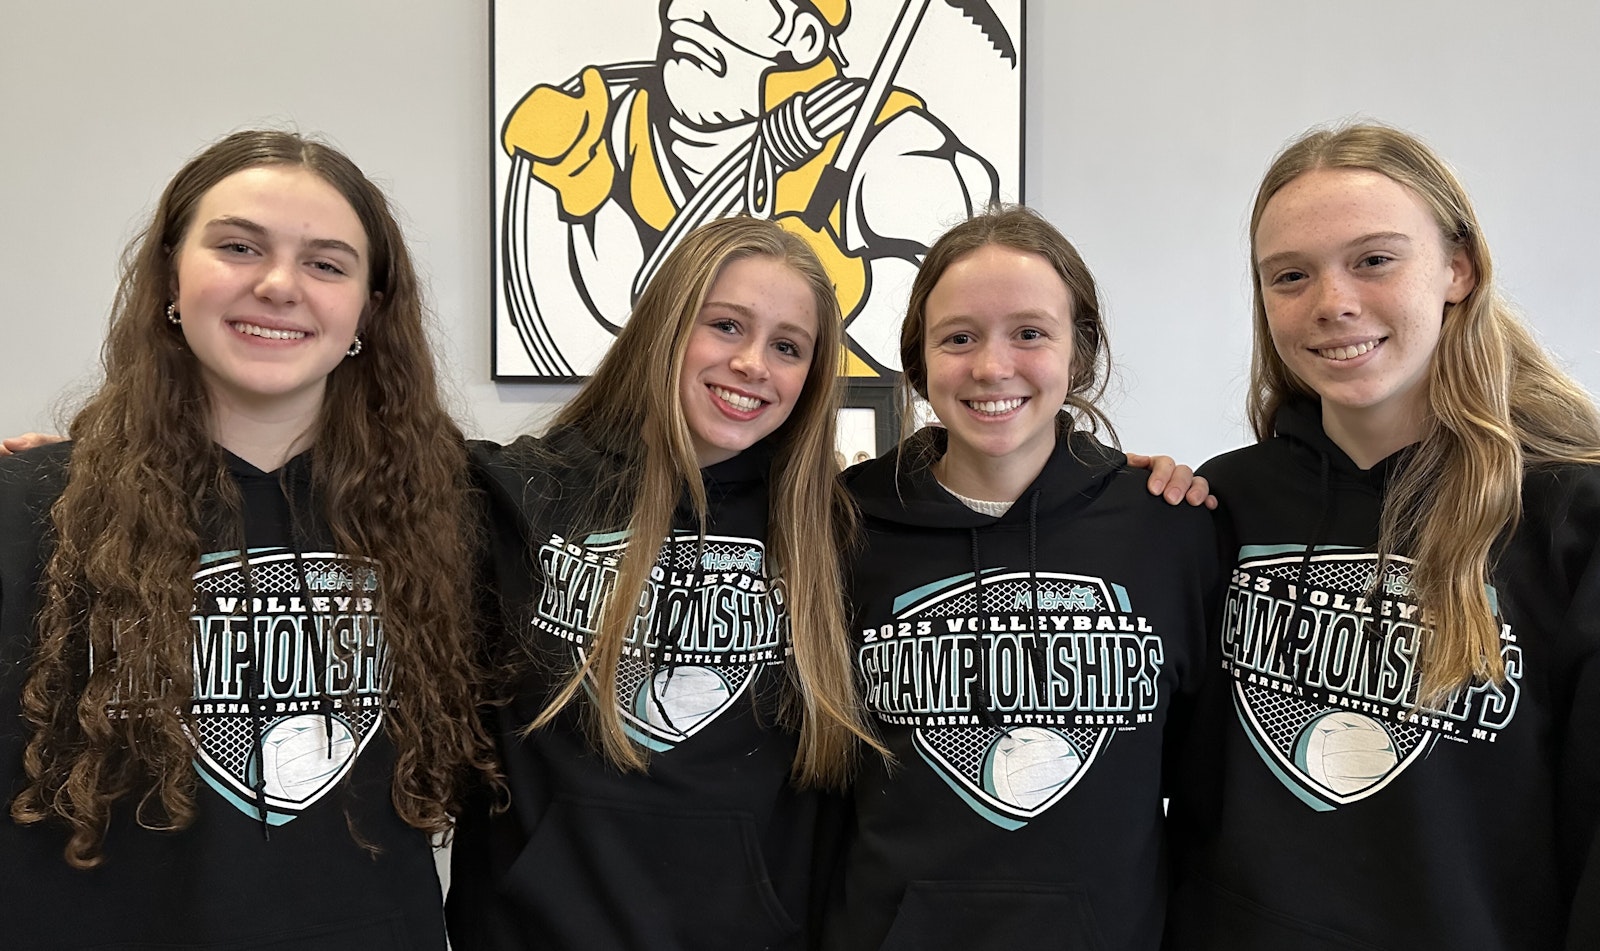 Left to right, juniors Sarah Bradley, Madelyn Krappmann, Erica Walker and Addison Pearce show off their 2023 MHSAA Division 4 championship gear. Combining their semifinal and final performances, Bradley totaled 56 kills, 31 digs and nine aces. Krappmann followed with 40 kills and 32 digs, Walker had 102 assists and Pearce 20 digs. Bradley’s 31 kills in the championship game is sixth best in state history. Walker’s 57 assists in the finals is tied for second best.